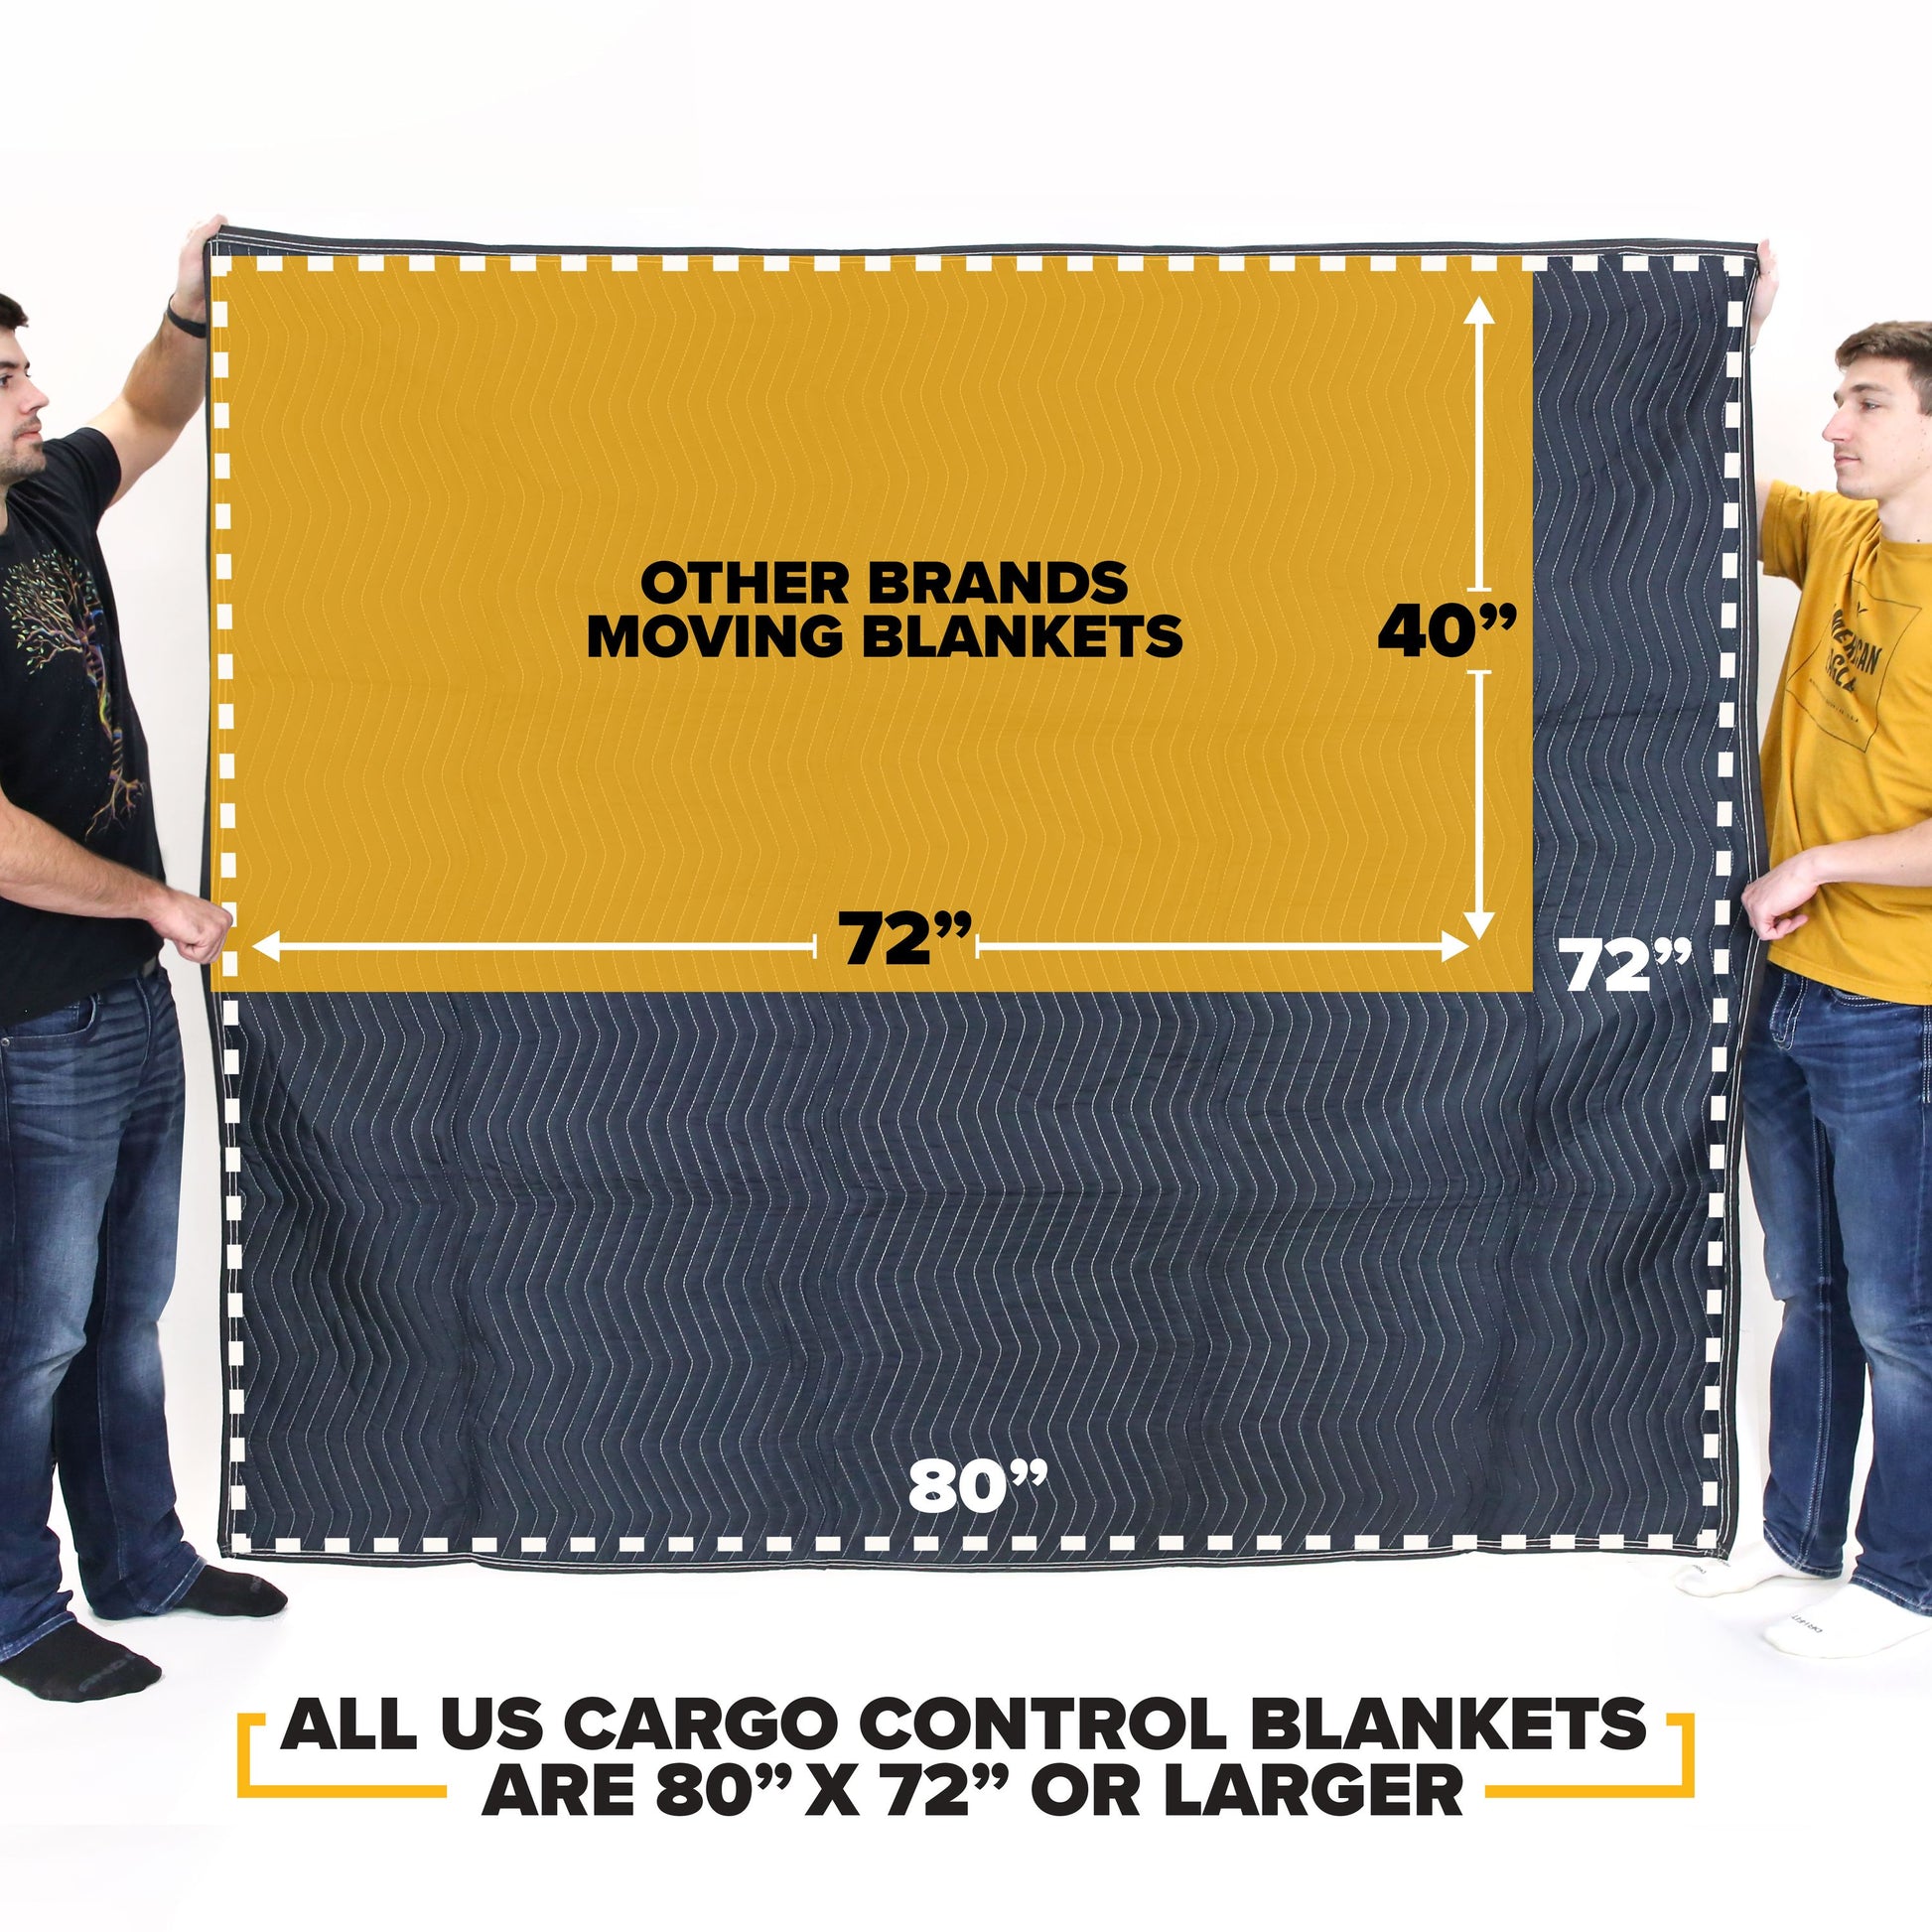 Moving Blankets - Preferred Mover 12 Pack - 78-80 lbs/dozen image 4 of 11